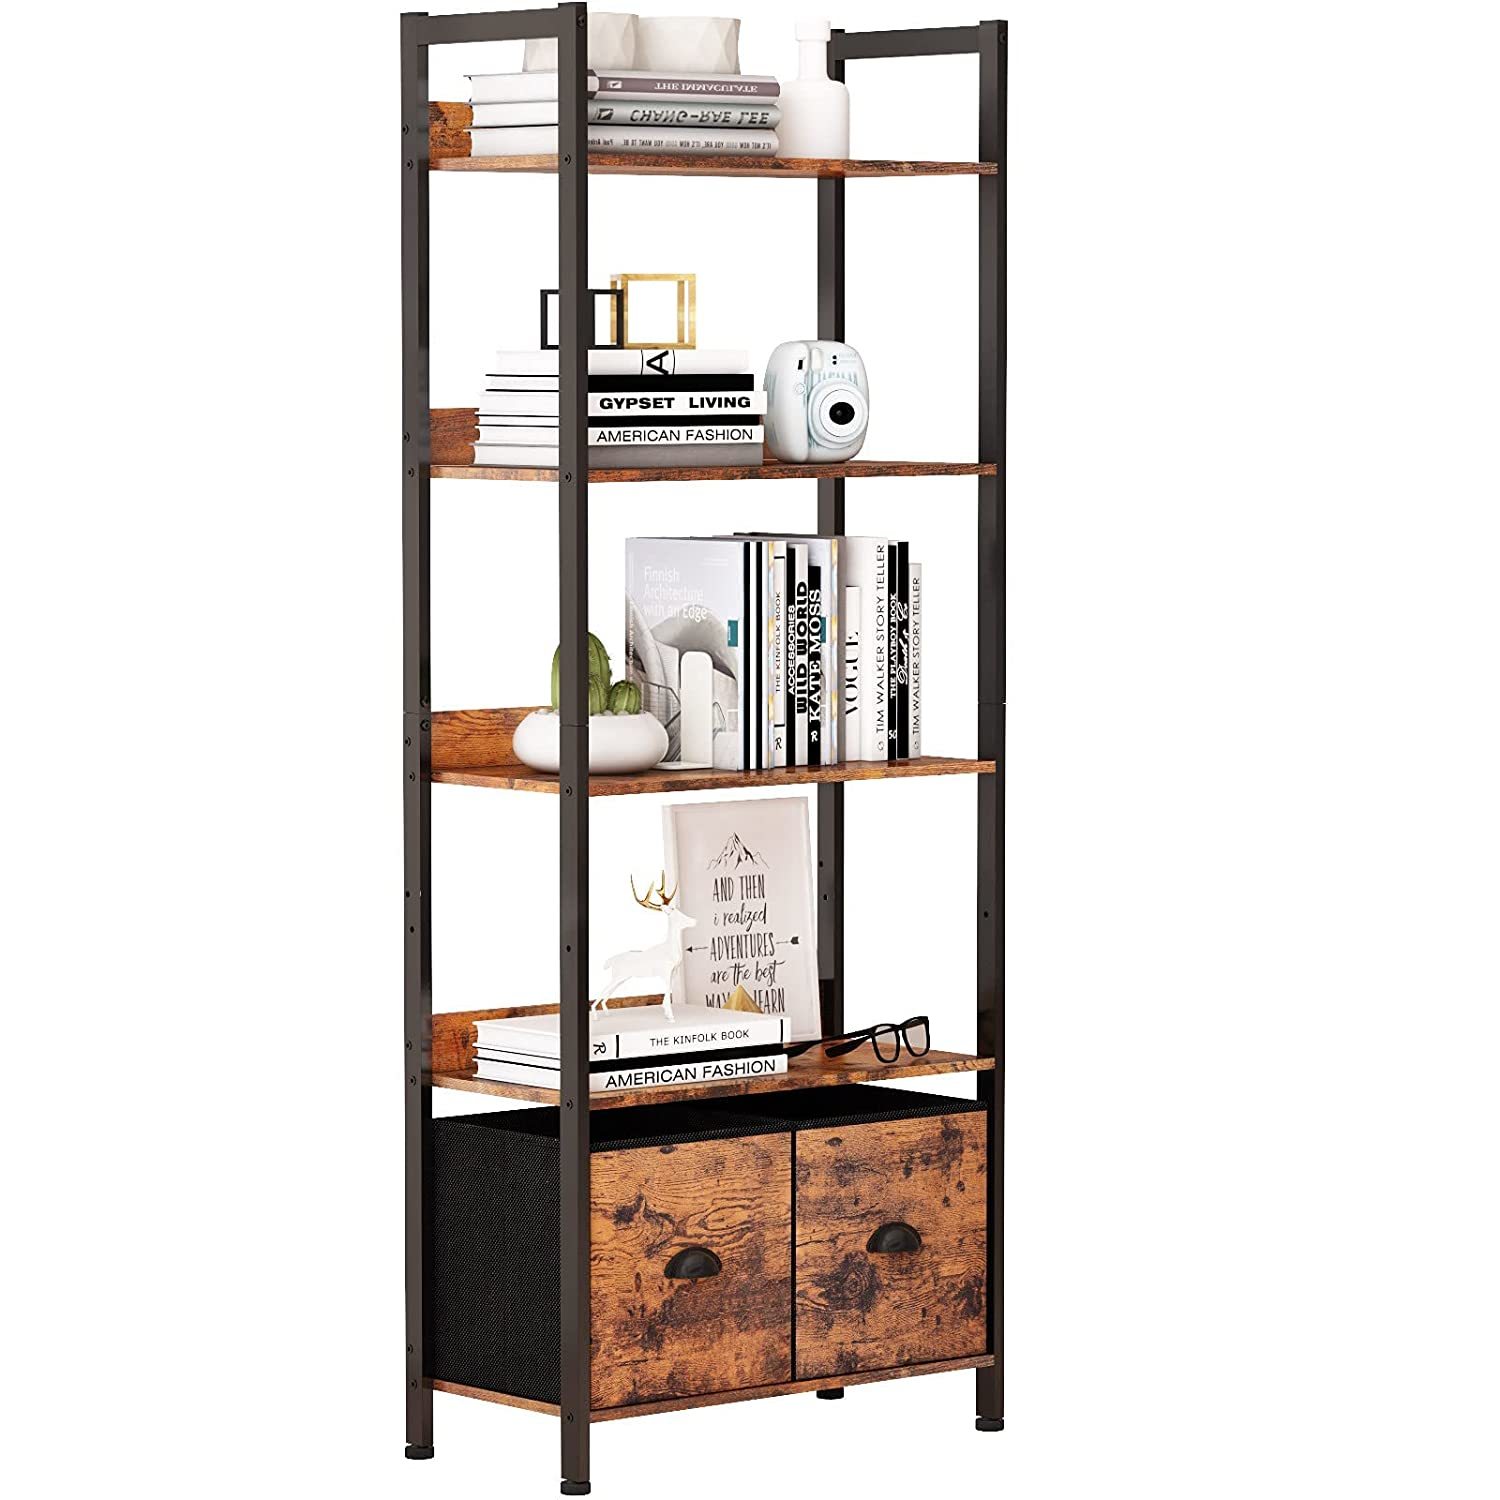 Primary image for 5-Tier Bookshelf, Tall Bookcase With 2 Storage Drawers, Industrial Display Stand